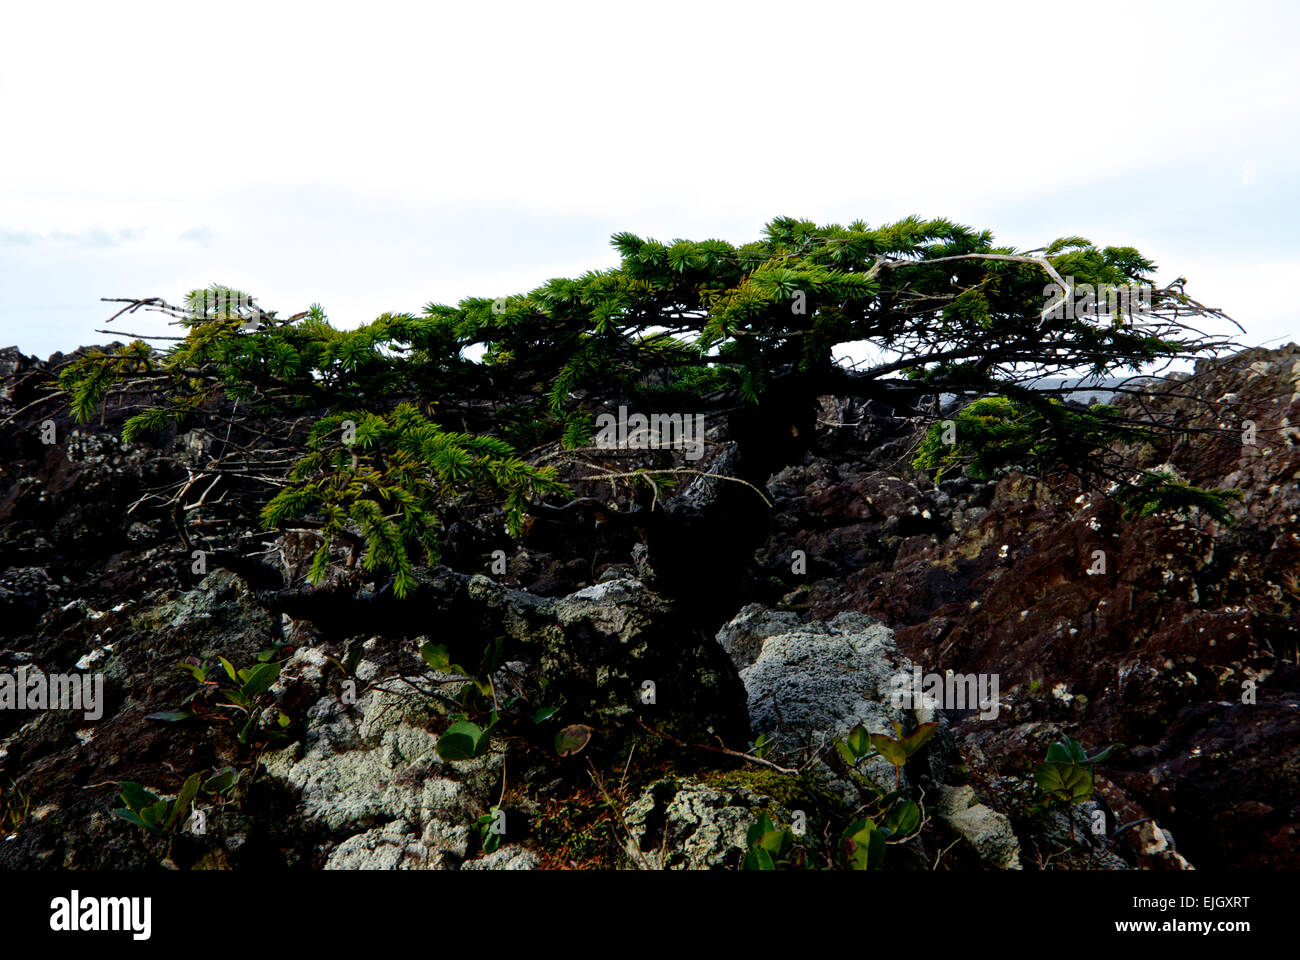 Natural bonsai plant hundreds of years old clinging to oceanside rocks west coast Vancouver Island BC Canada Stock Photo